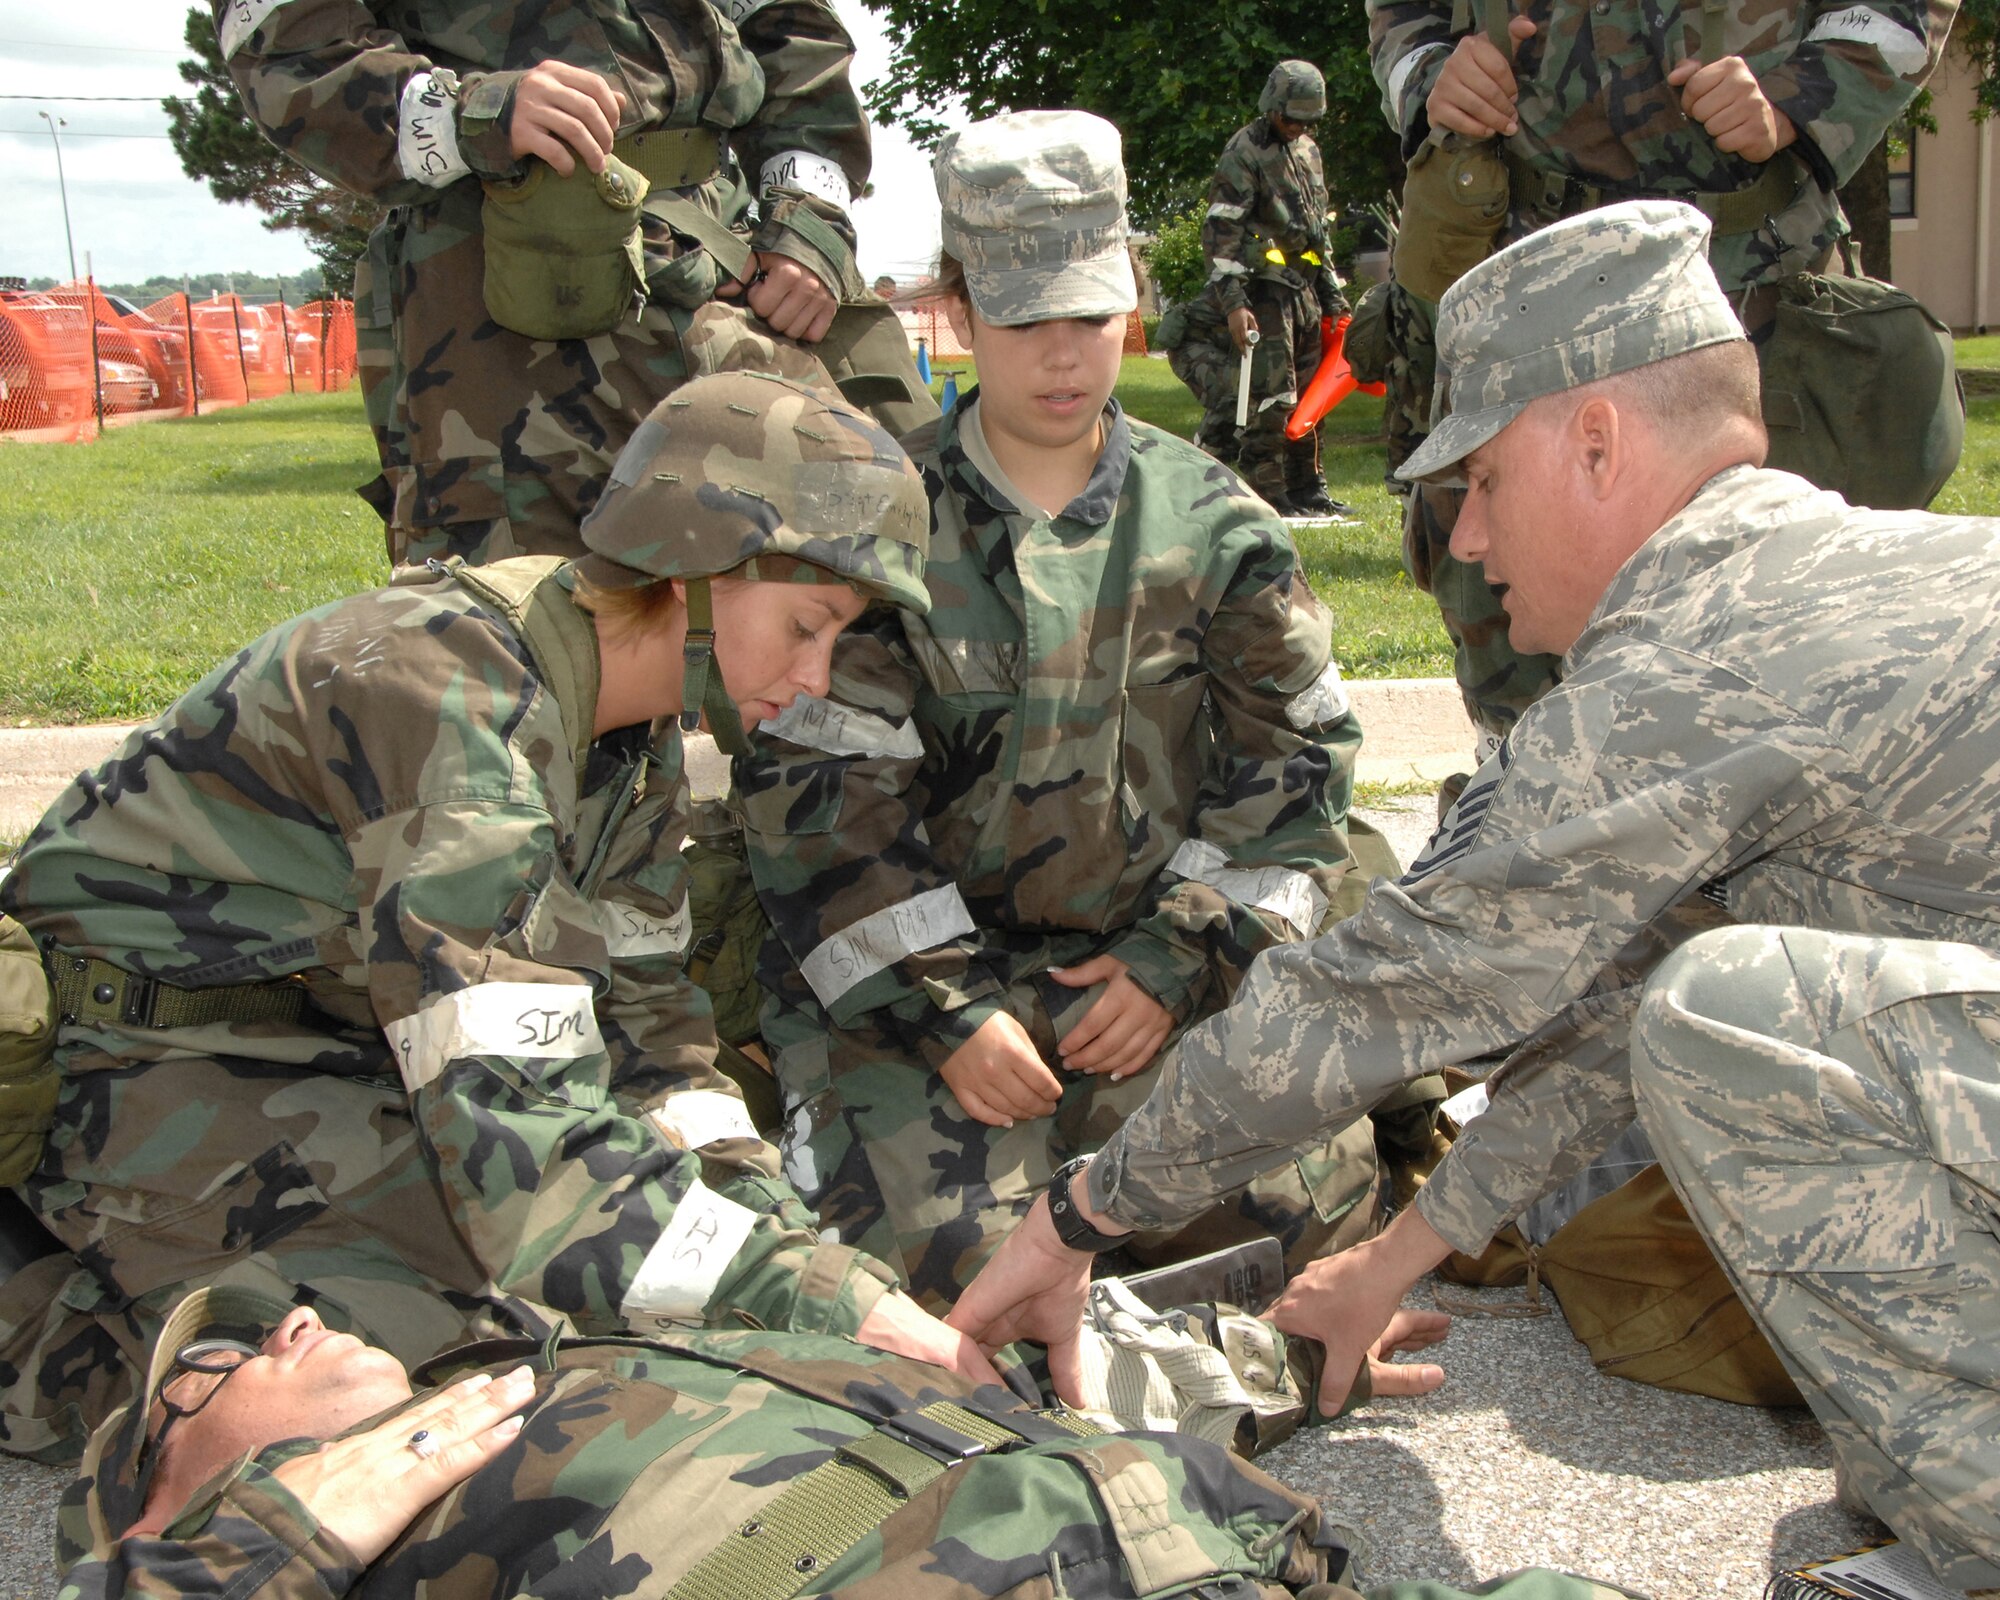 OFFUTT AIR FORCE BASE, Neb. -- Members of Team Offutt, responding to a mock broken arm incident, practice their first aid skills during combat day here July 14. U.S. Air Force Photo by Dana Heard